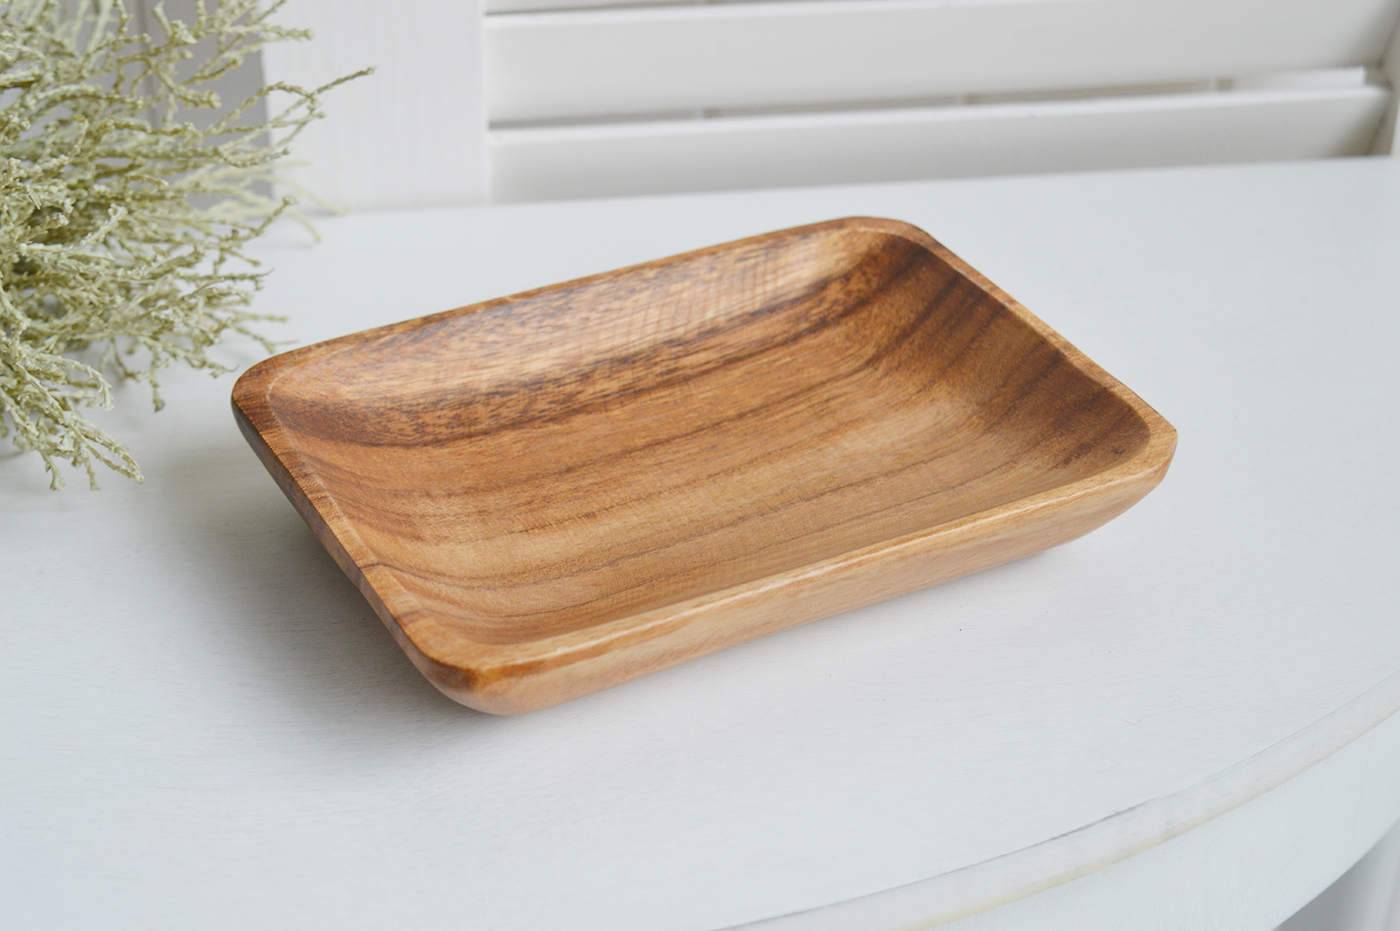 Tisbury wooden Tray for New England, farmhouse,  Country and coastal homes and interior decor from The White Lighthouse Furniture